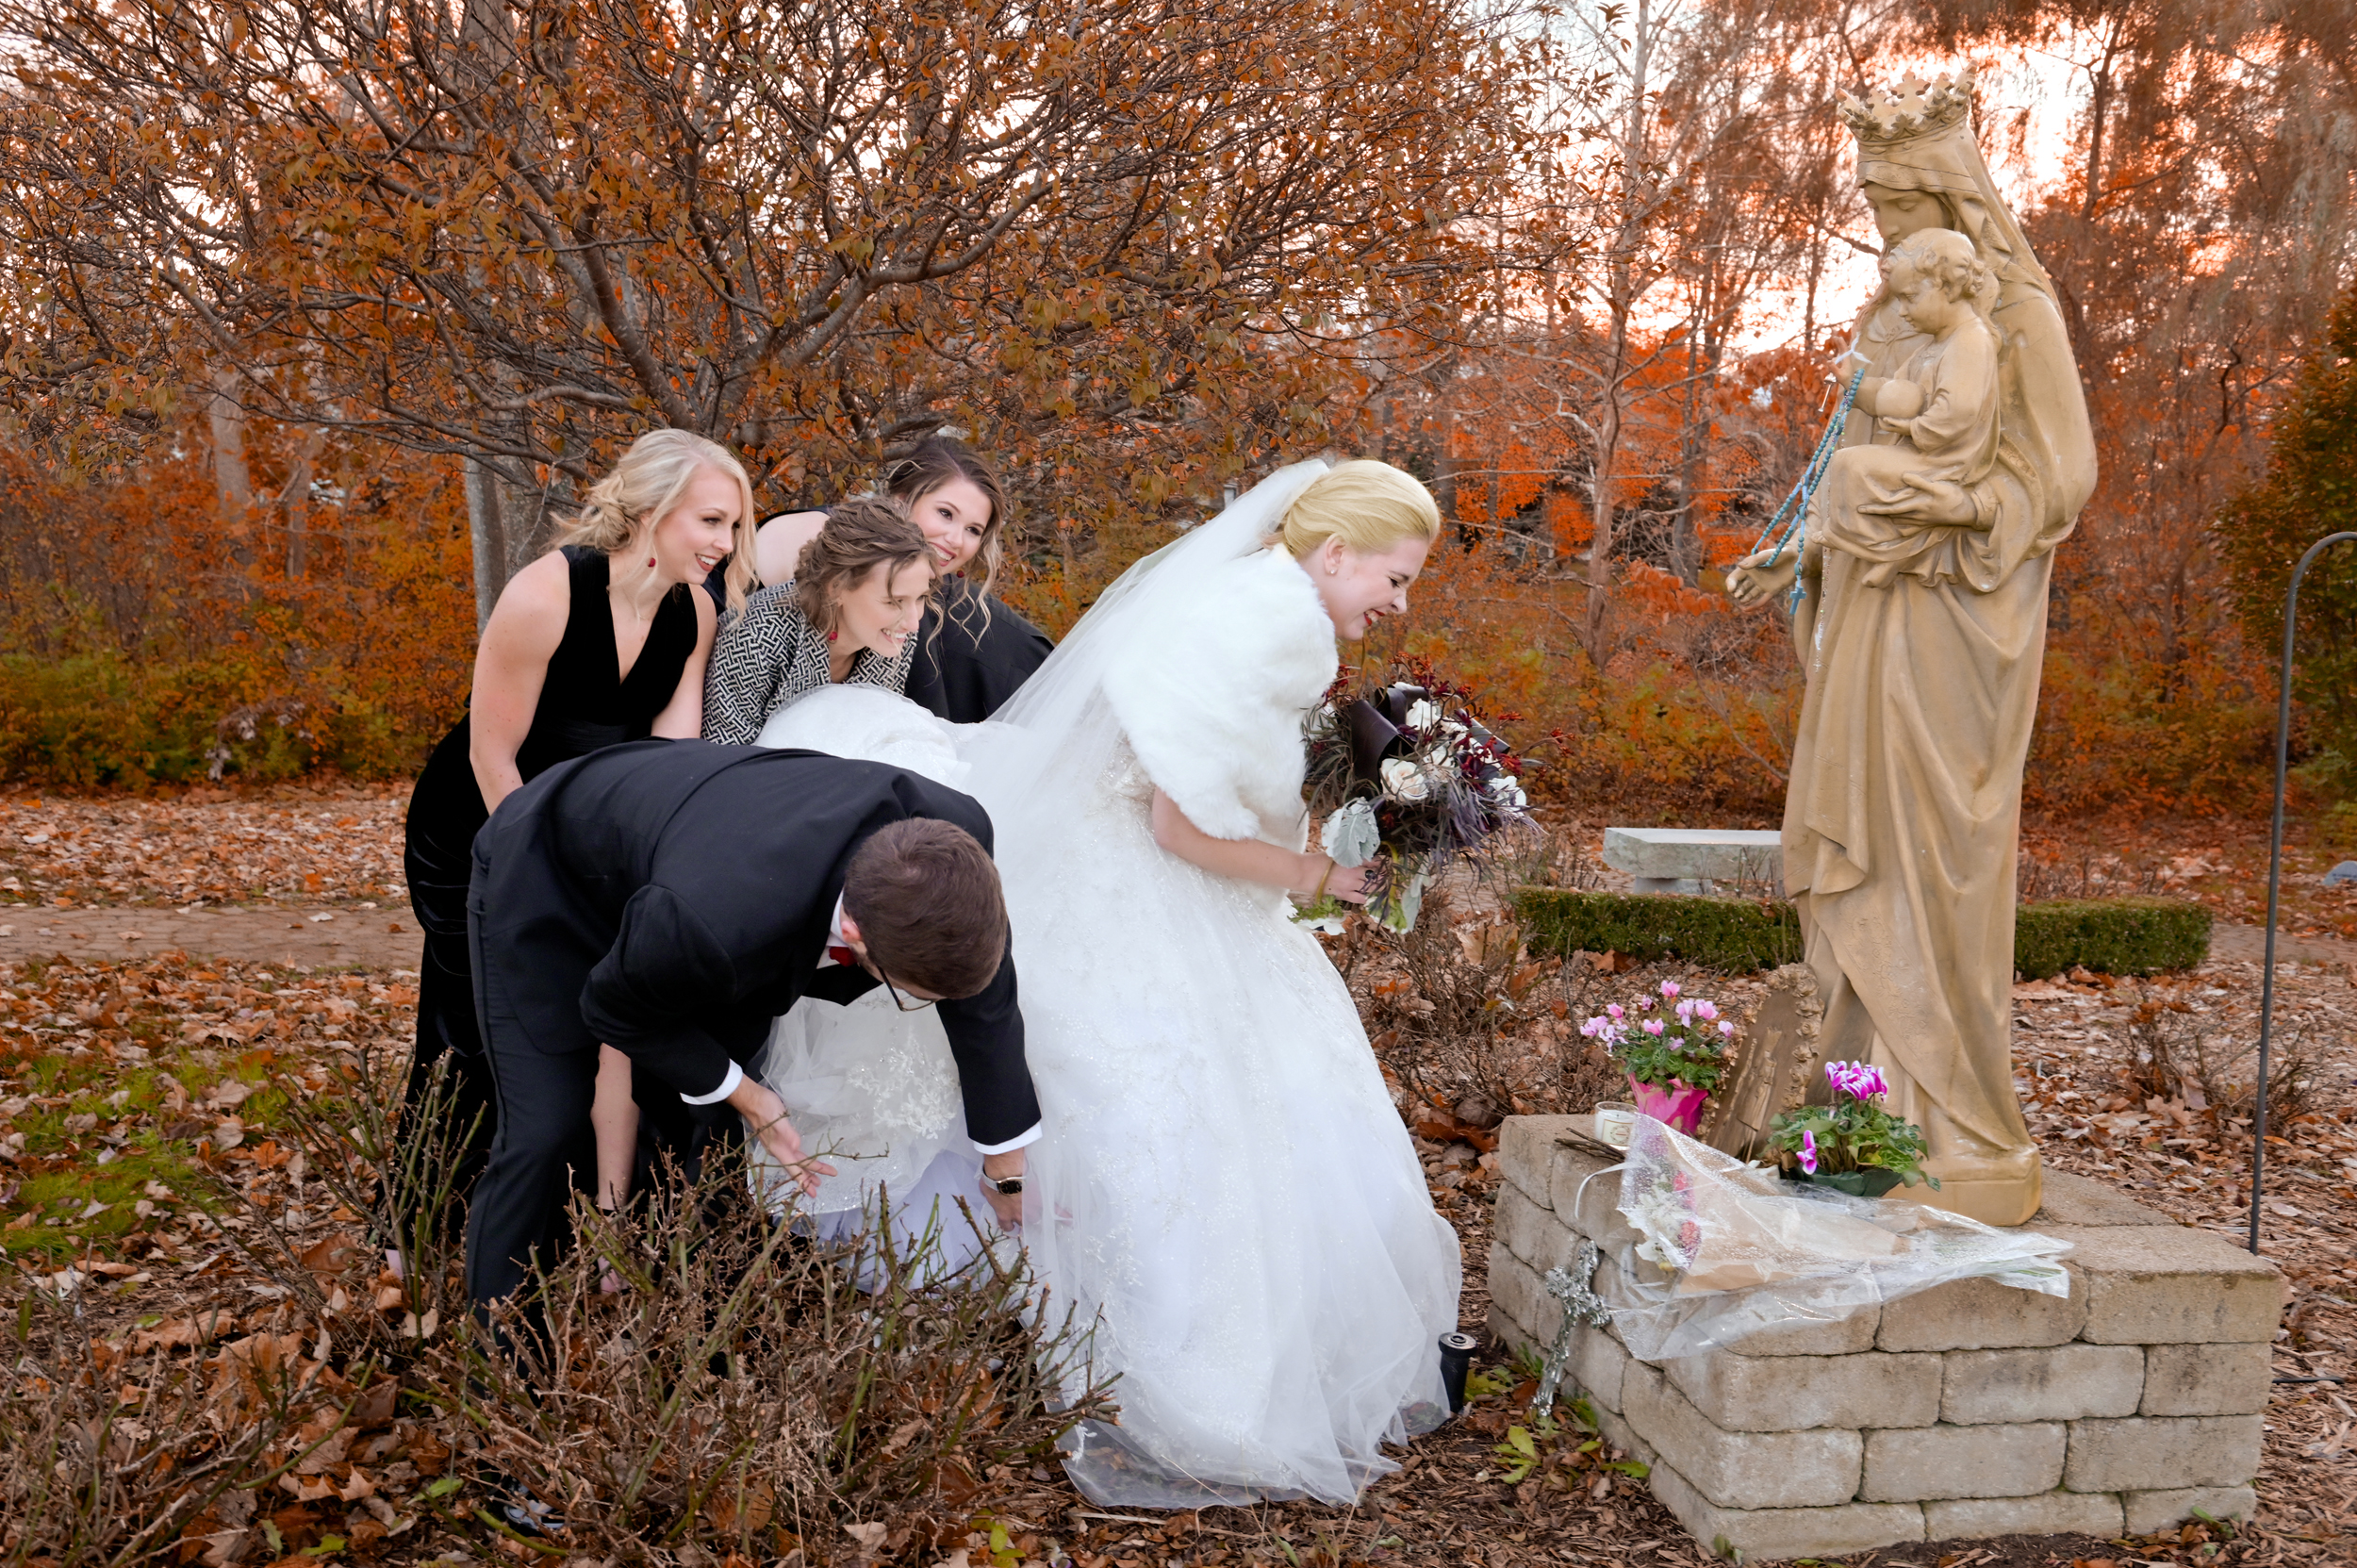 Bride is tangled in rose bushes while praying to St. Therese.